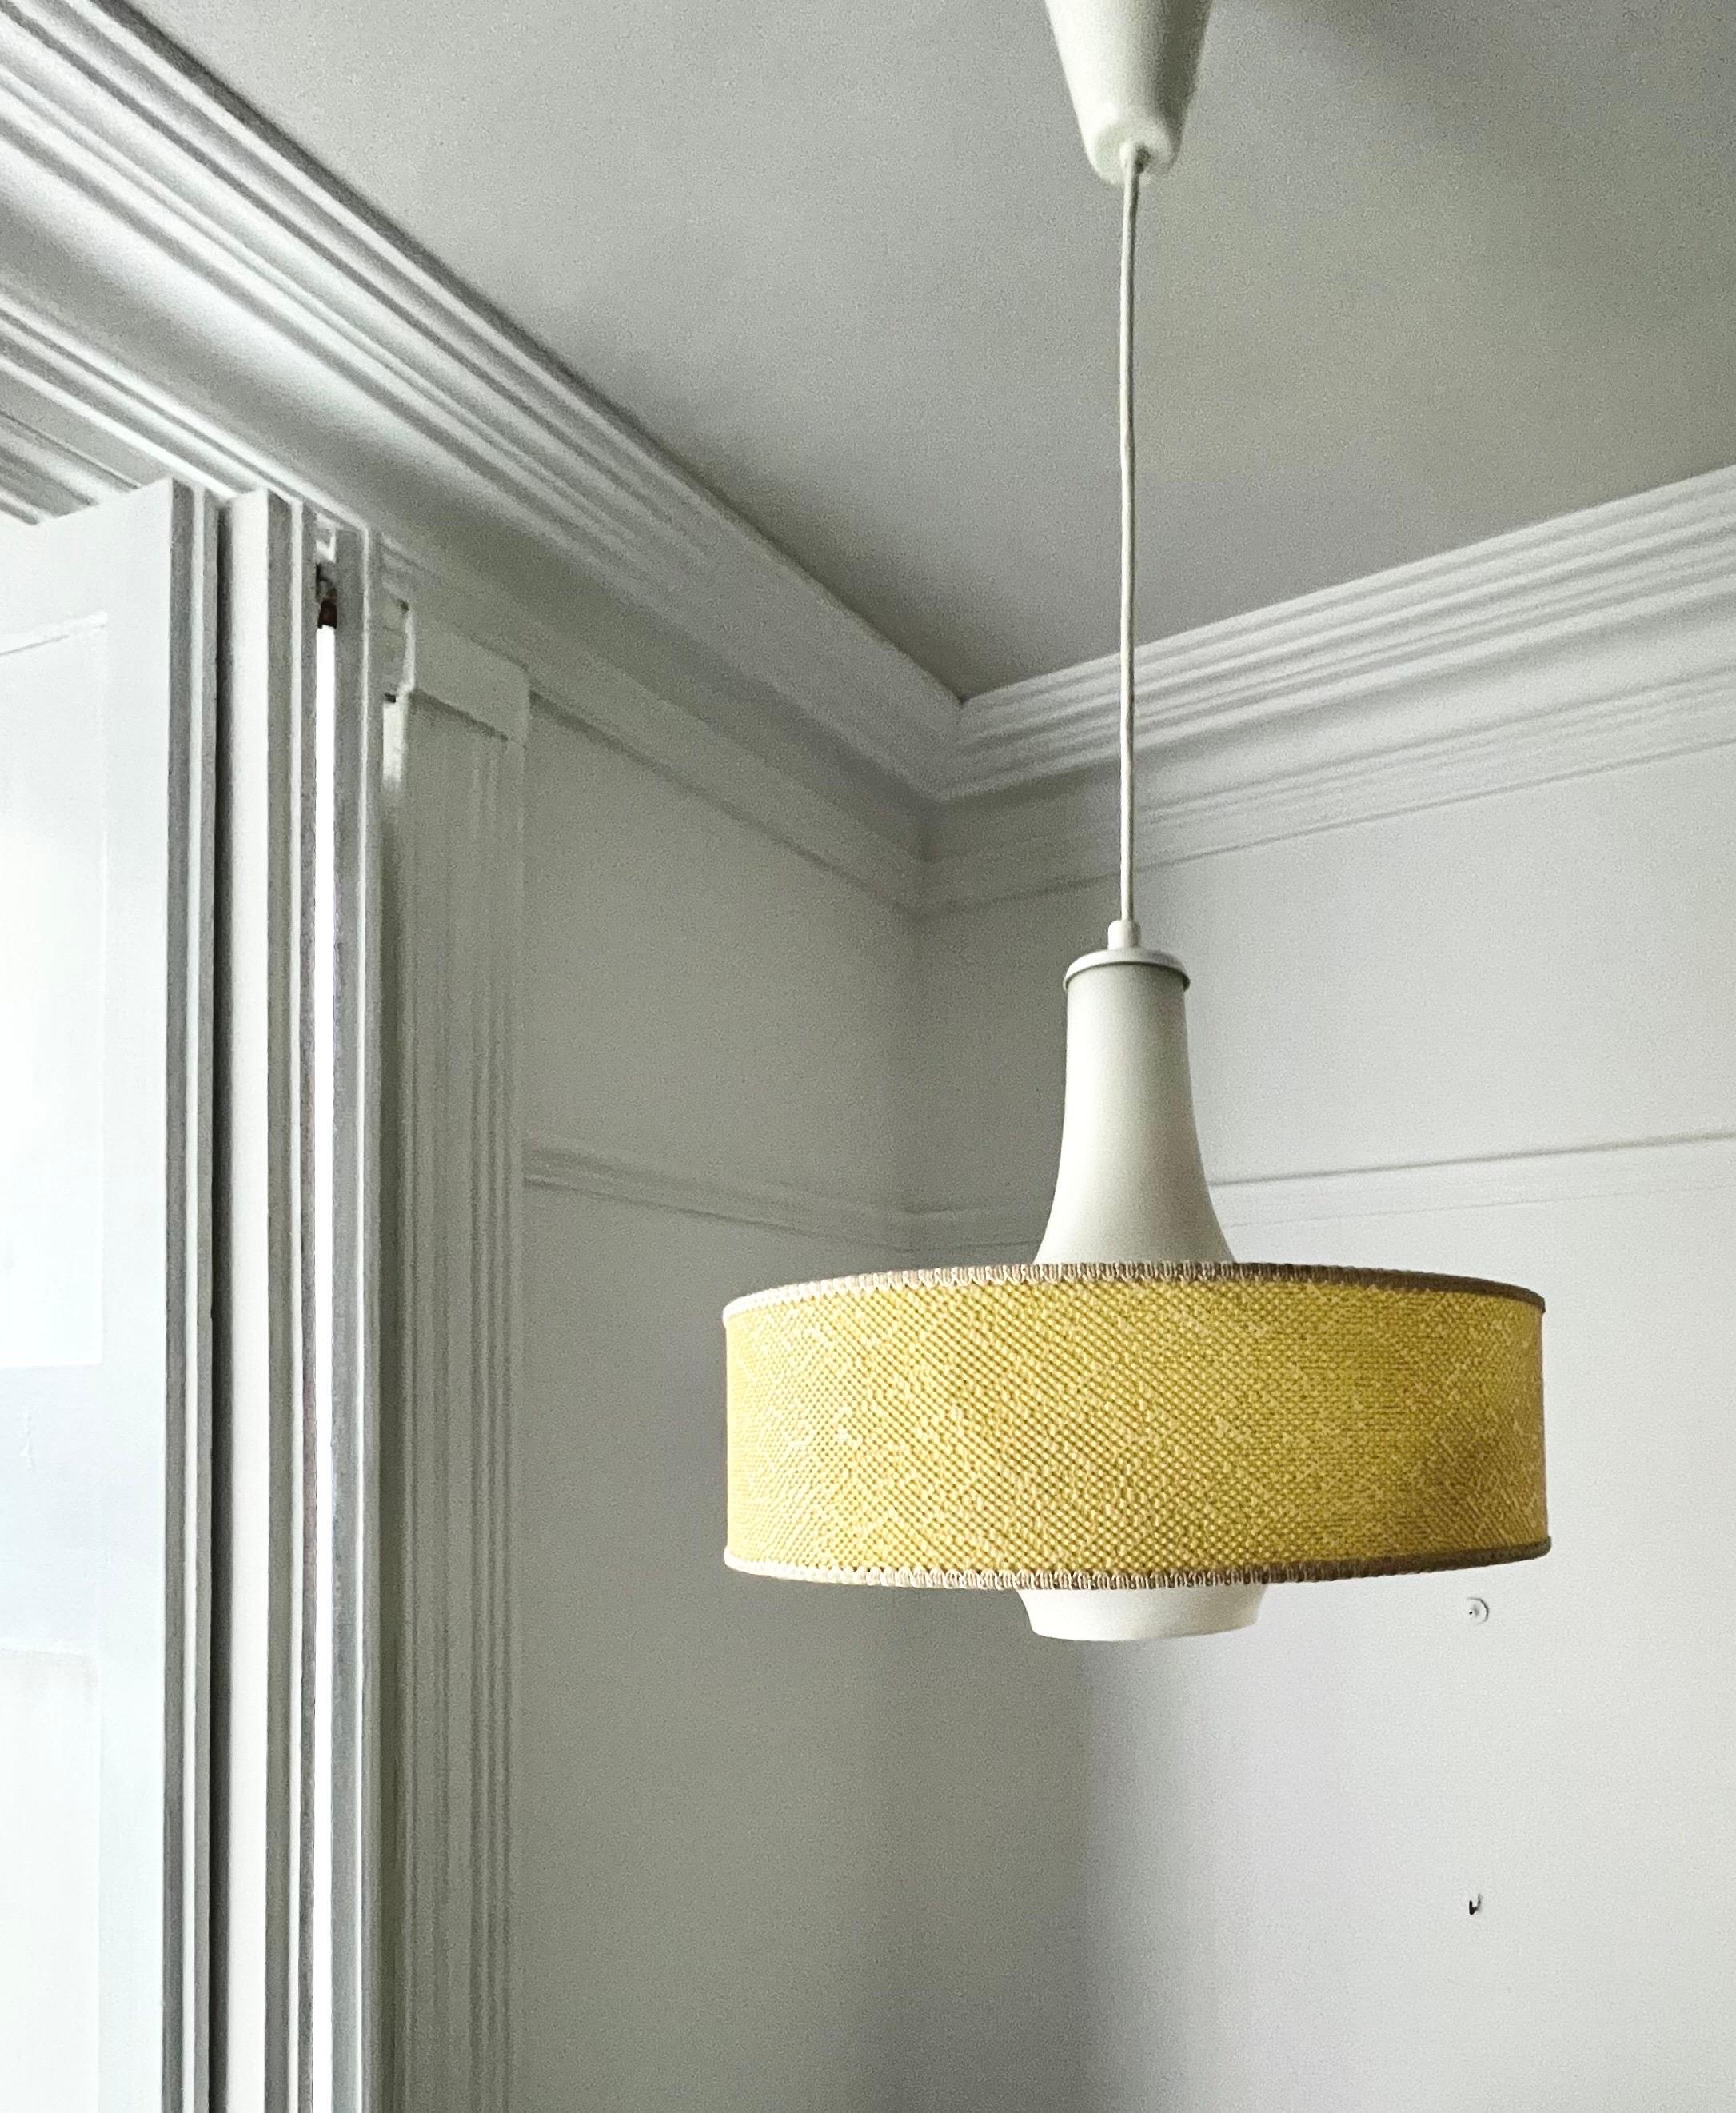 Finnish Mid-Century Glass Pendant Light with Optional Yellow Shade by Itsu of Finland For Sale